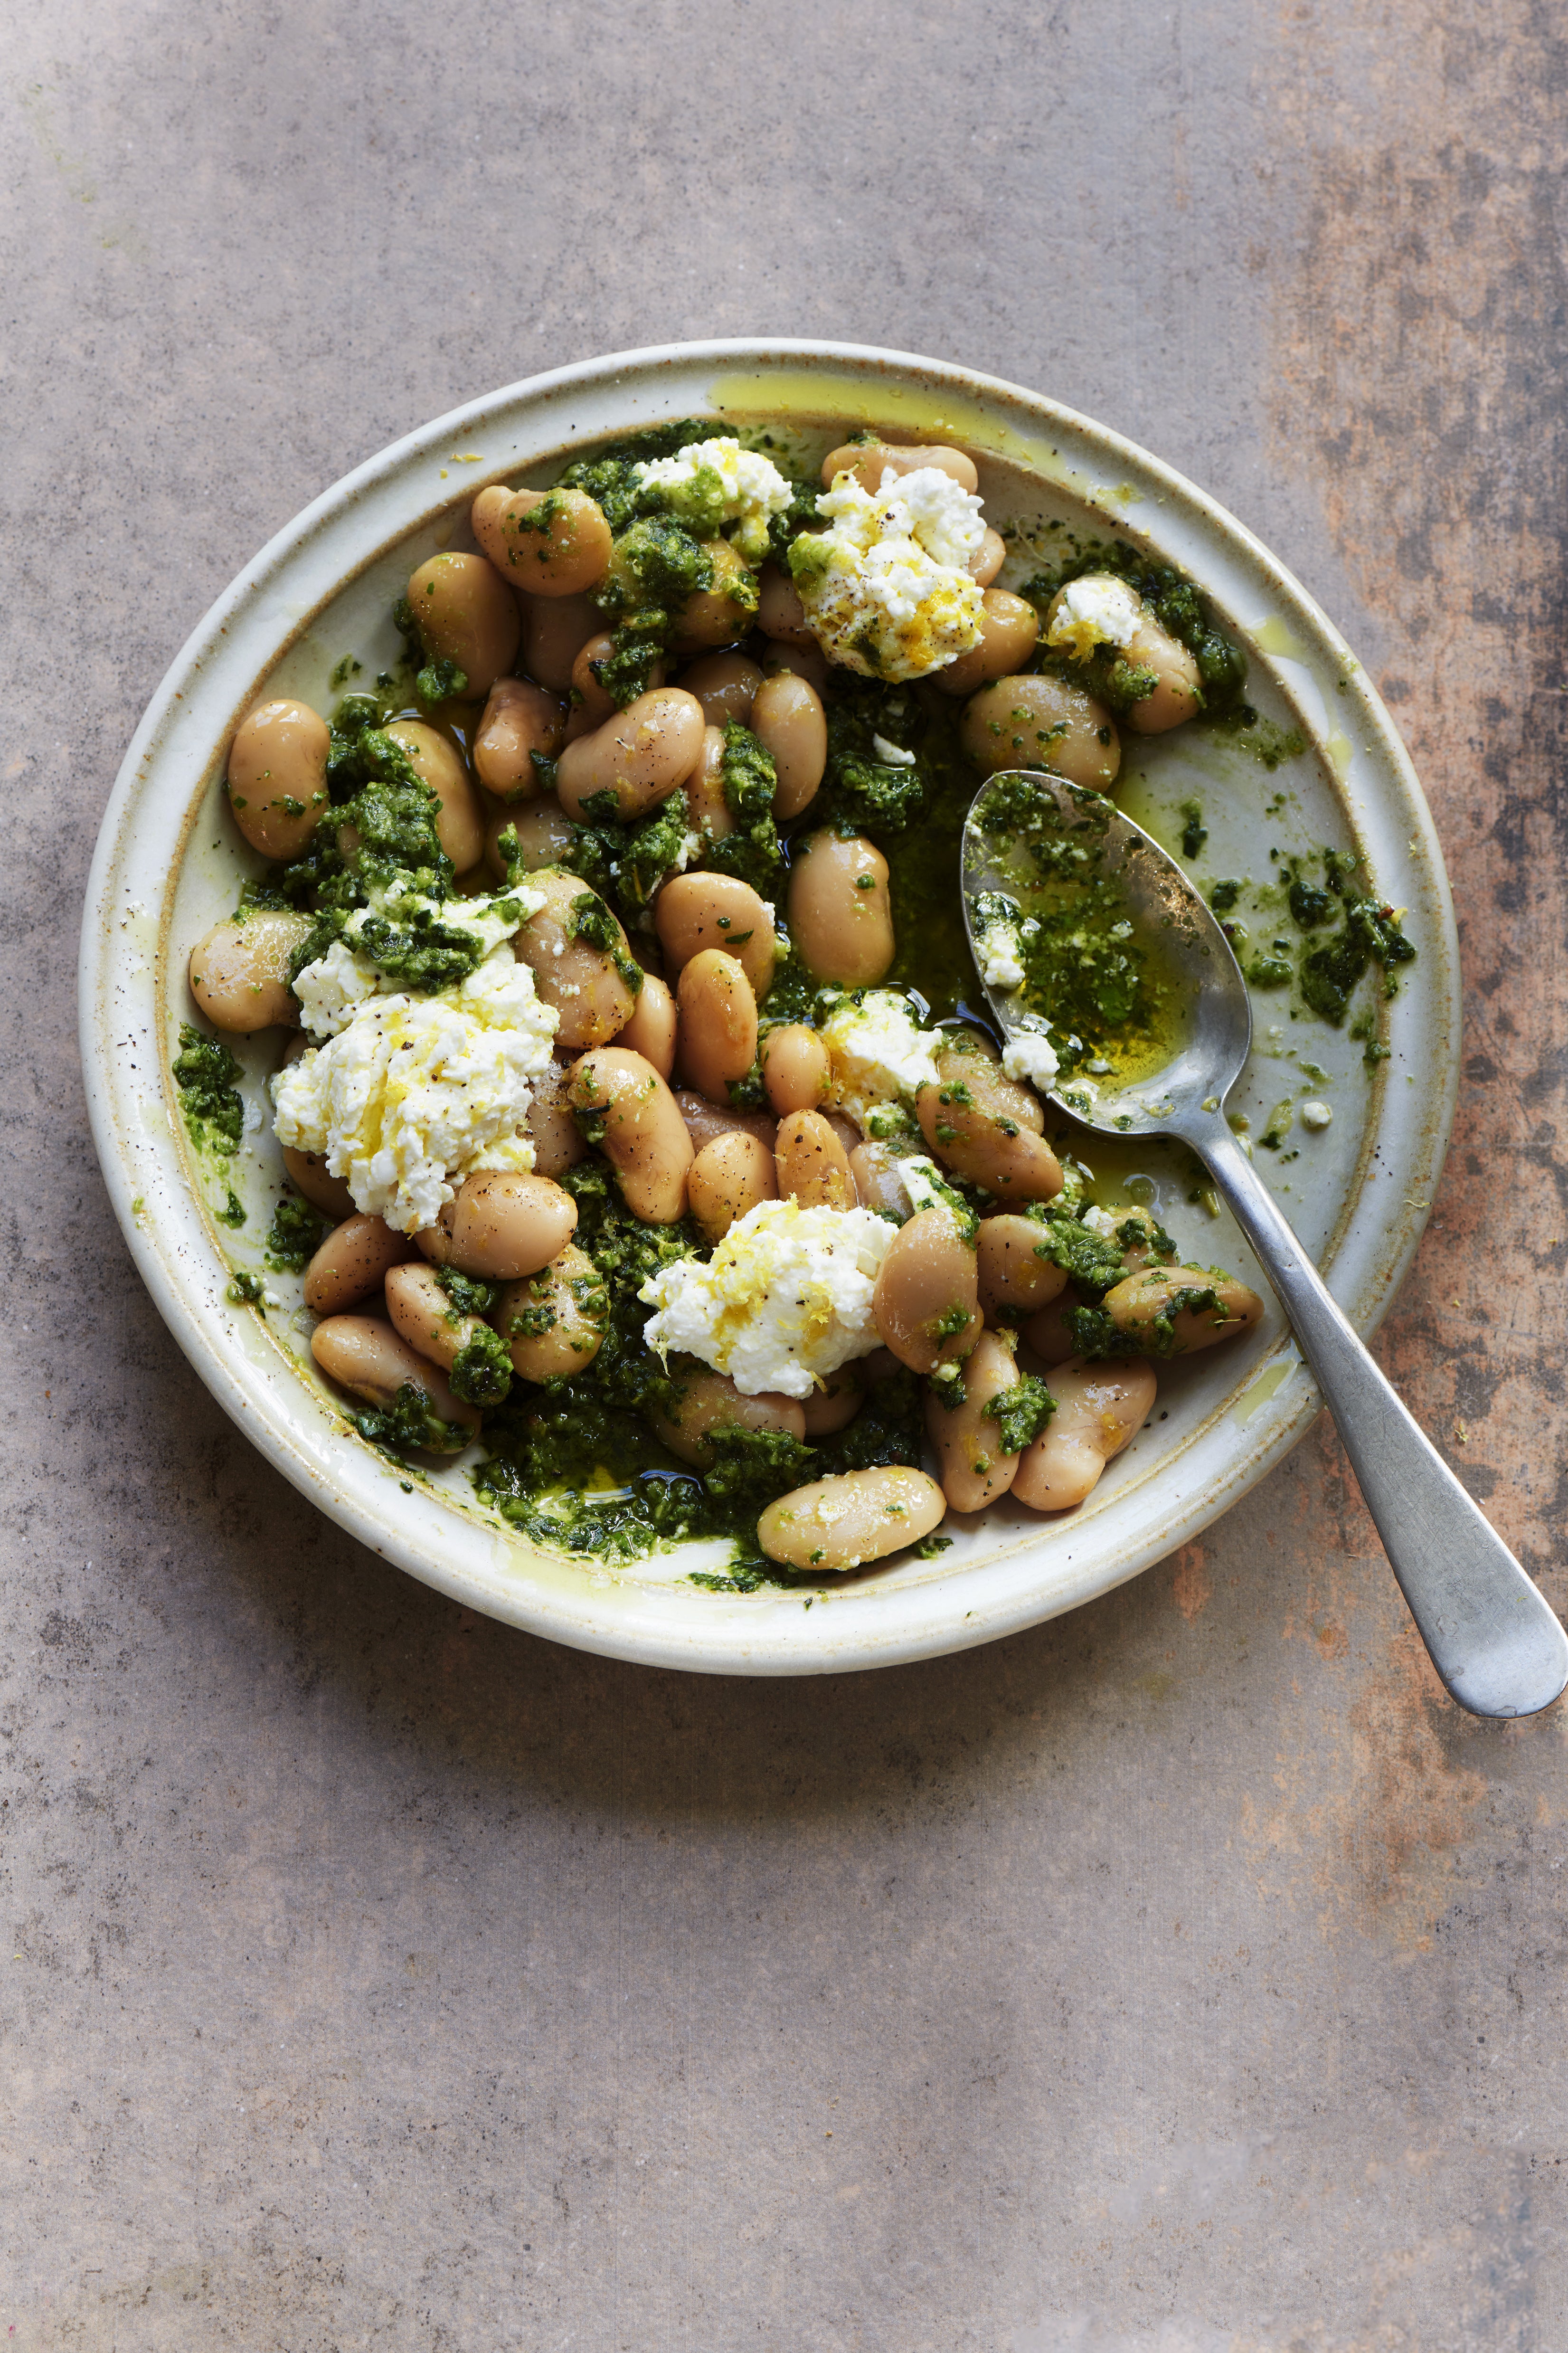 These ricotta and pesto butter beans make for a speedy weeknight dinner